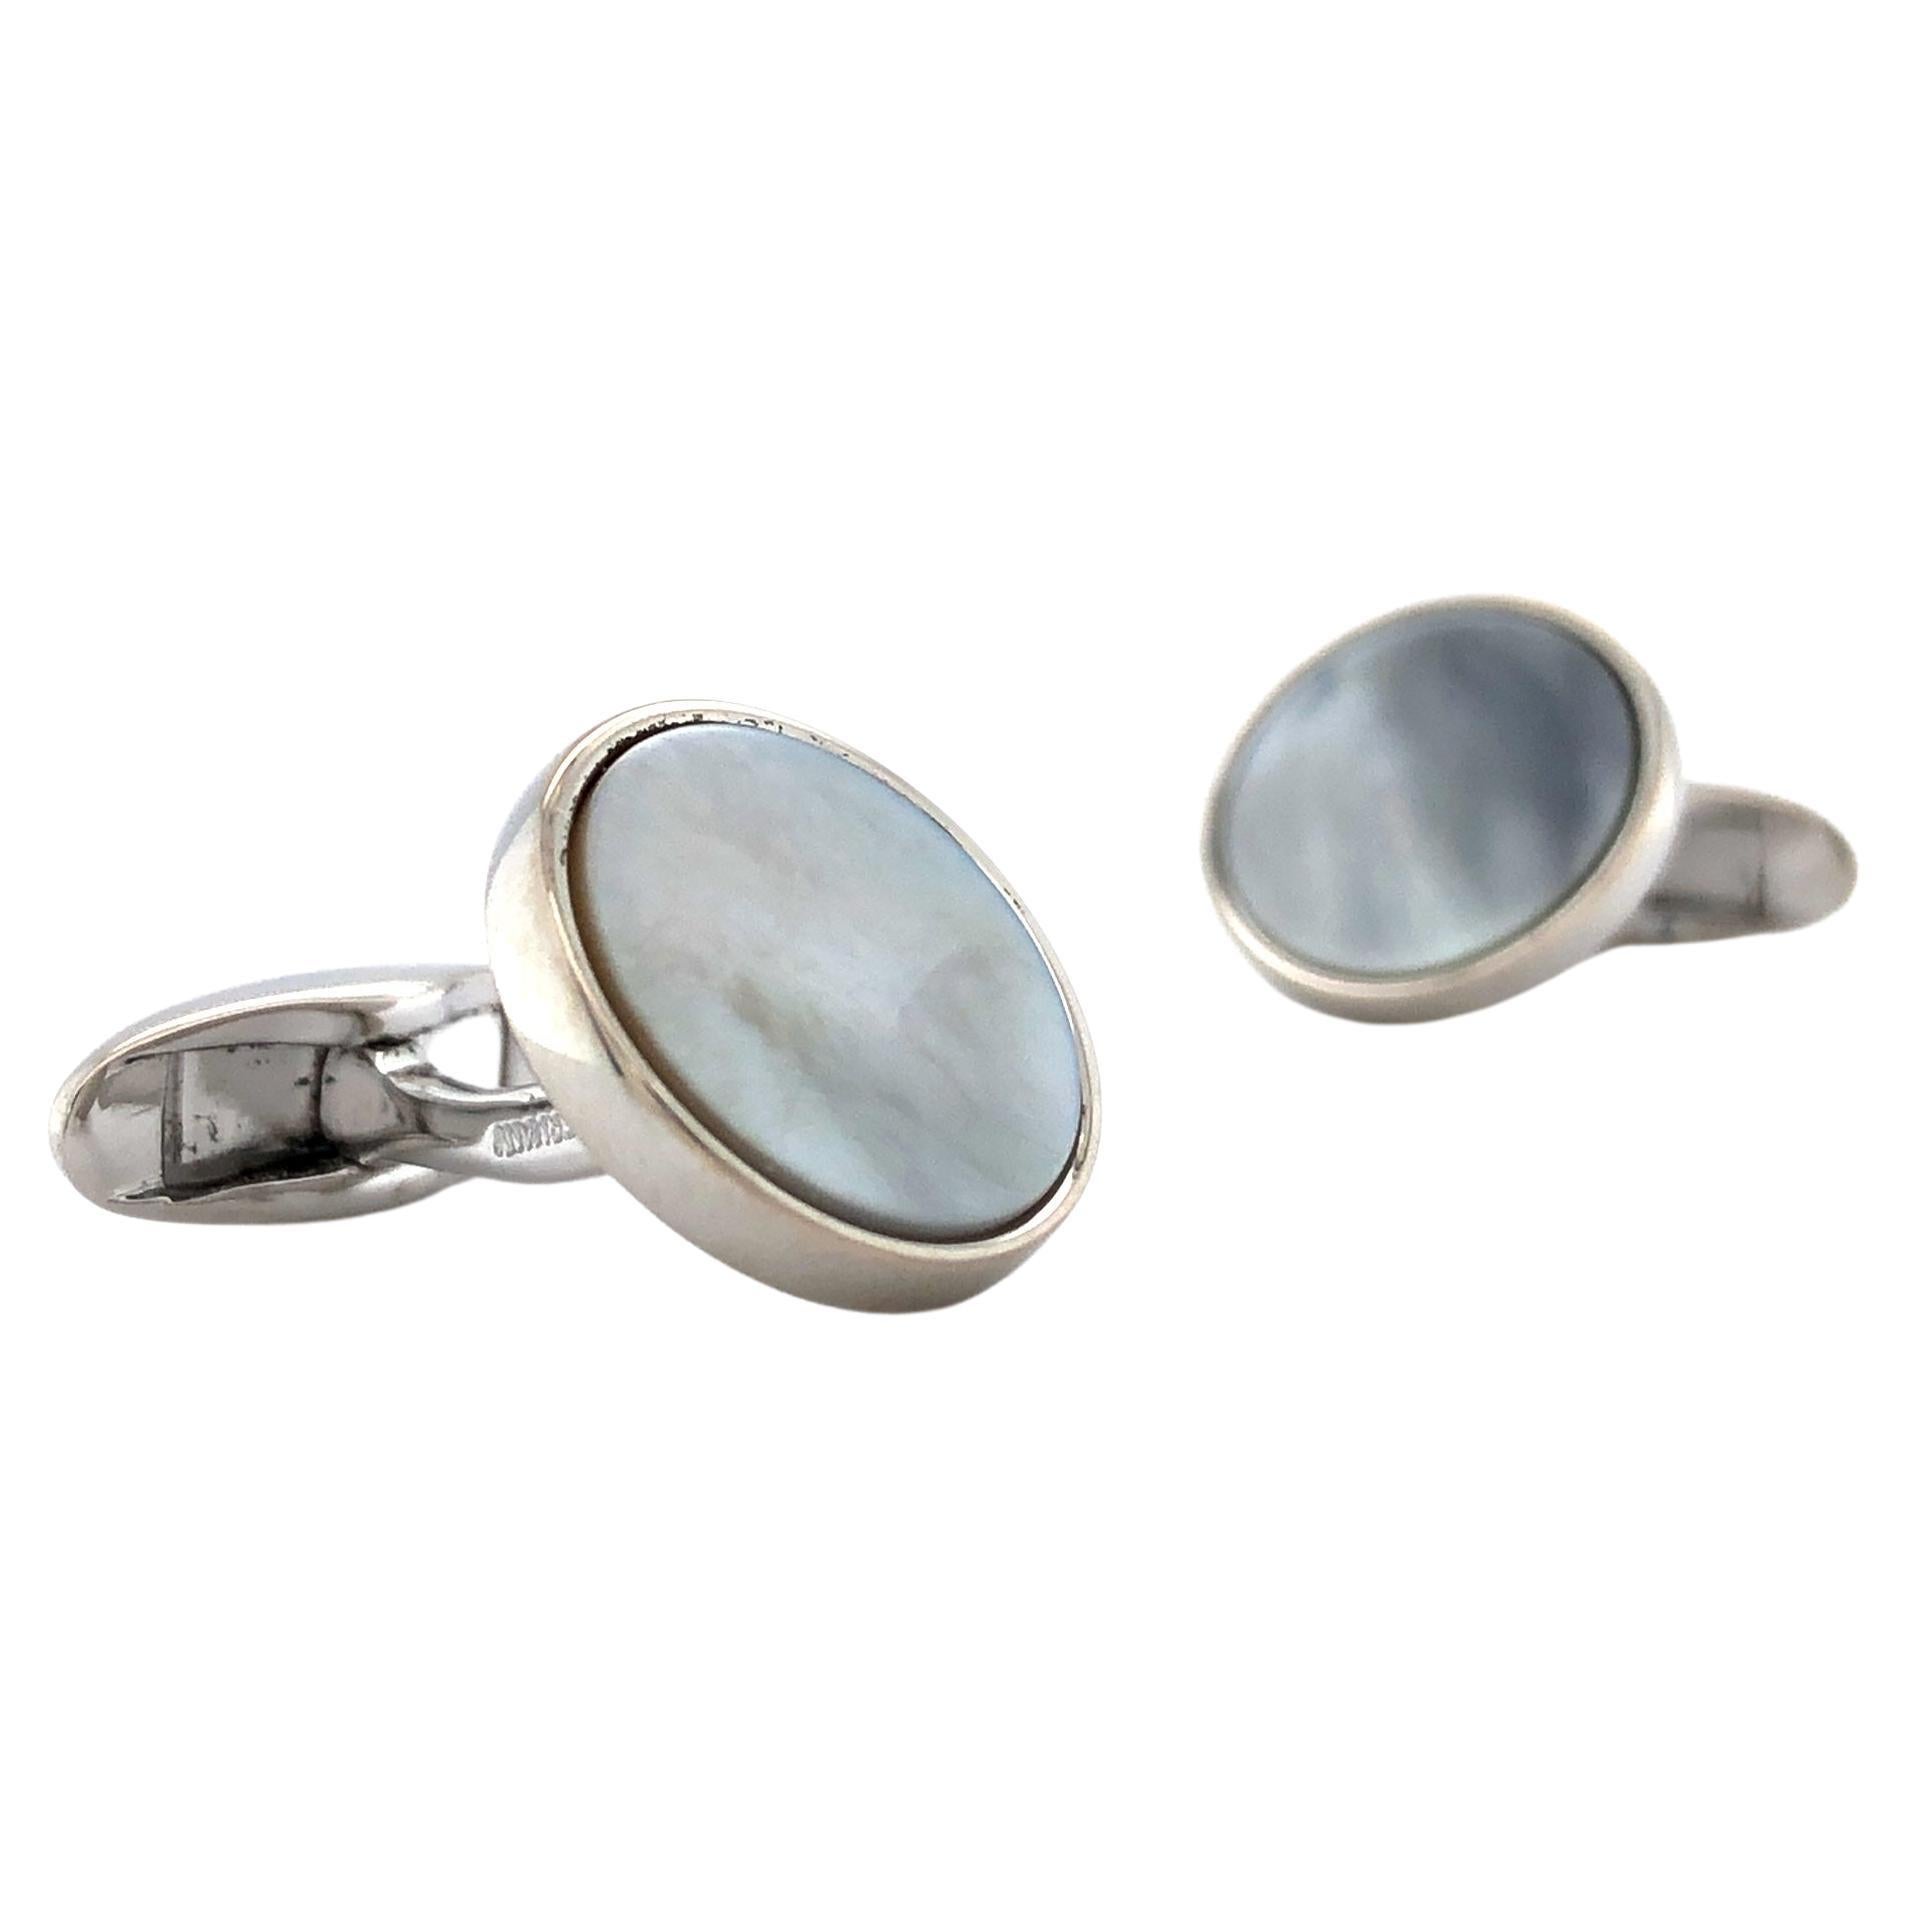 Round Cufflinks - 925 Sterling Silver - Mother of Pearl Inlay - Diameter 15 mm